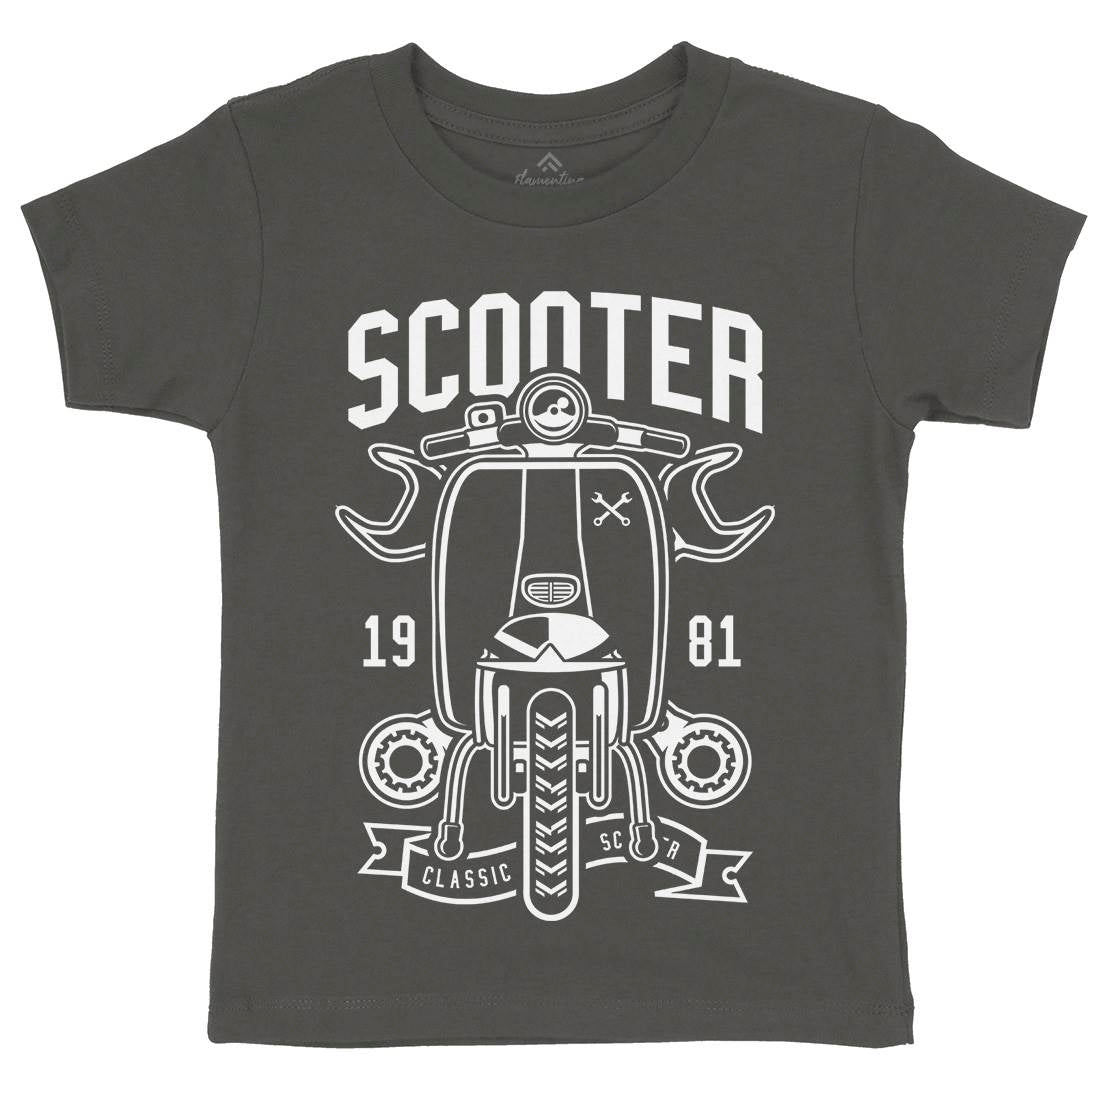 Scooter Classic Kids Crew Neck T-Shirt Motorcycles B618